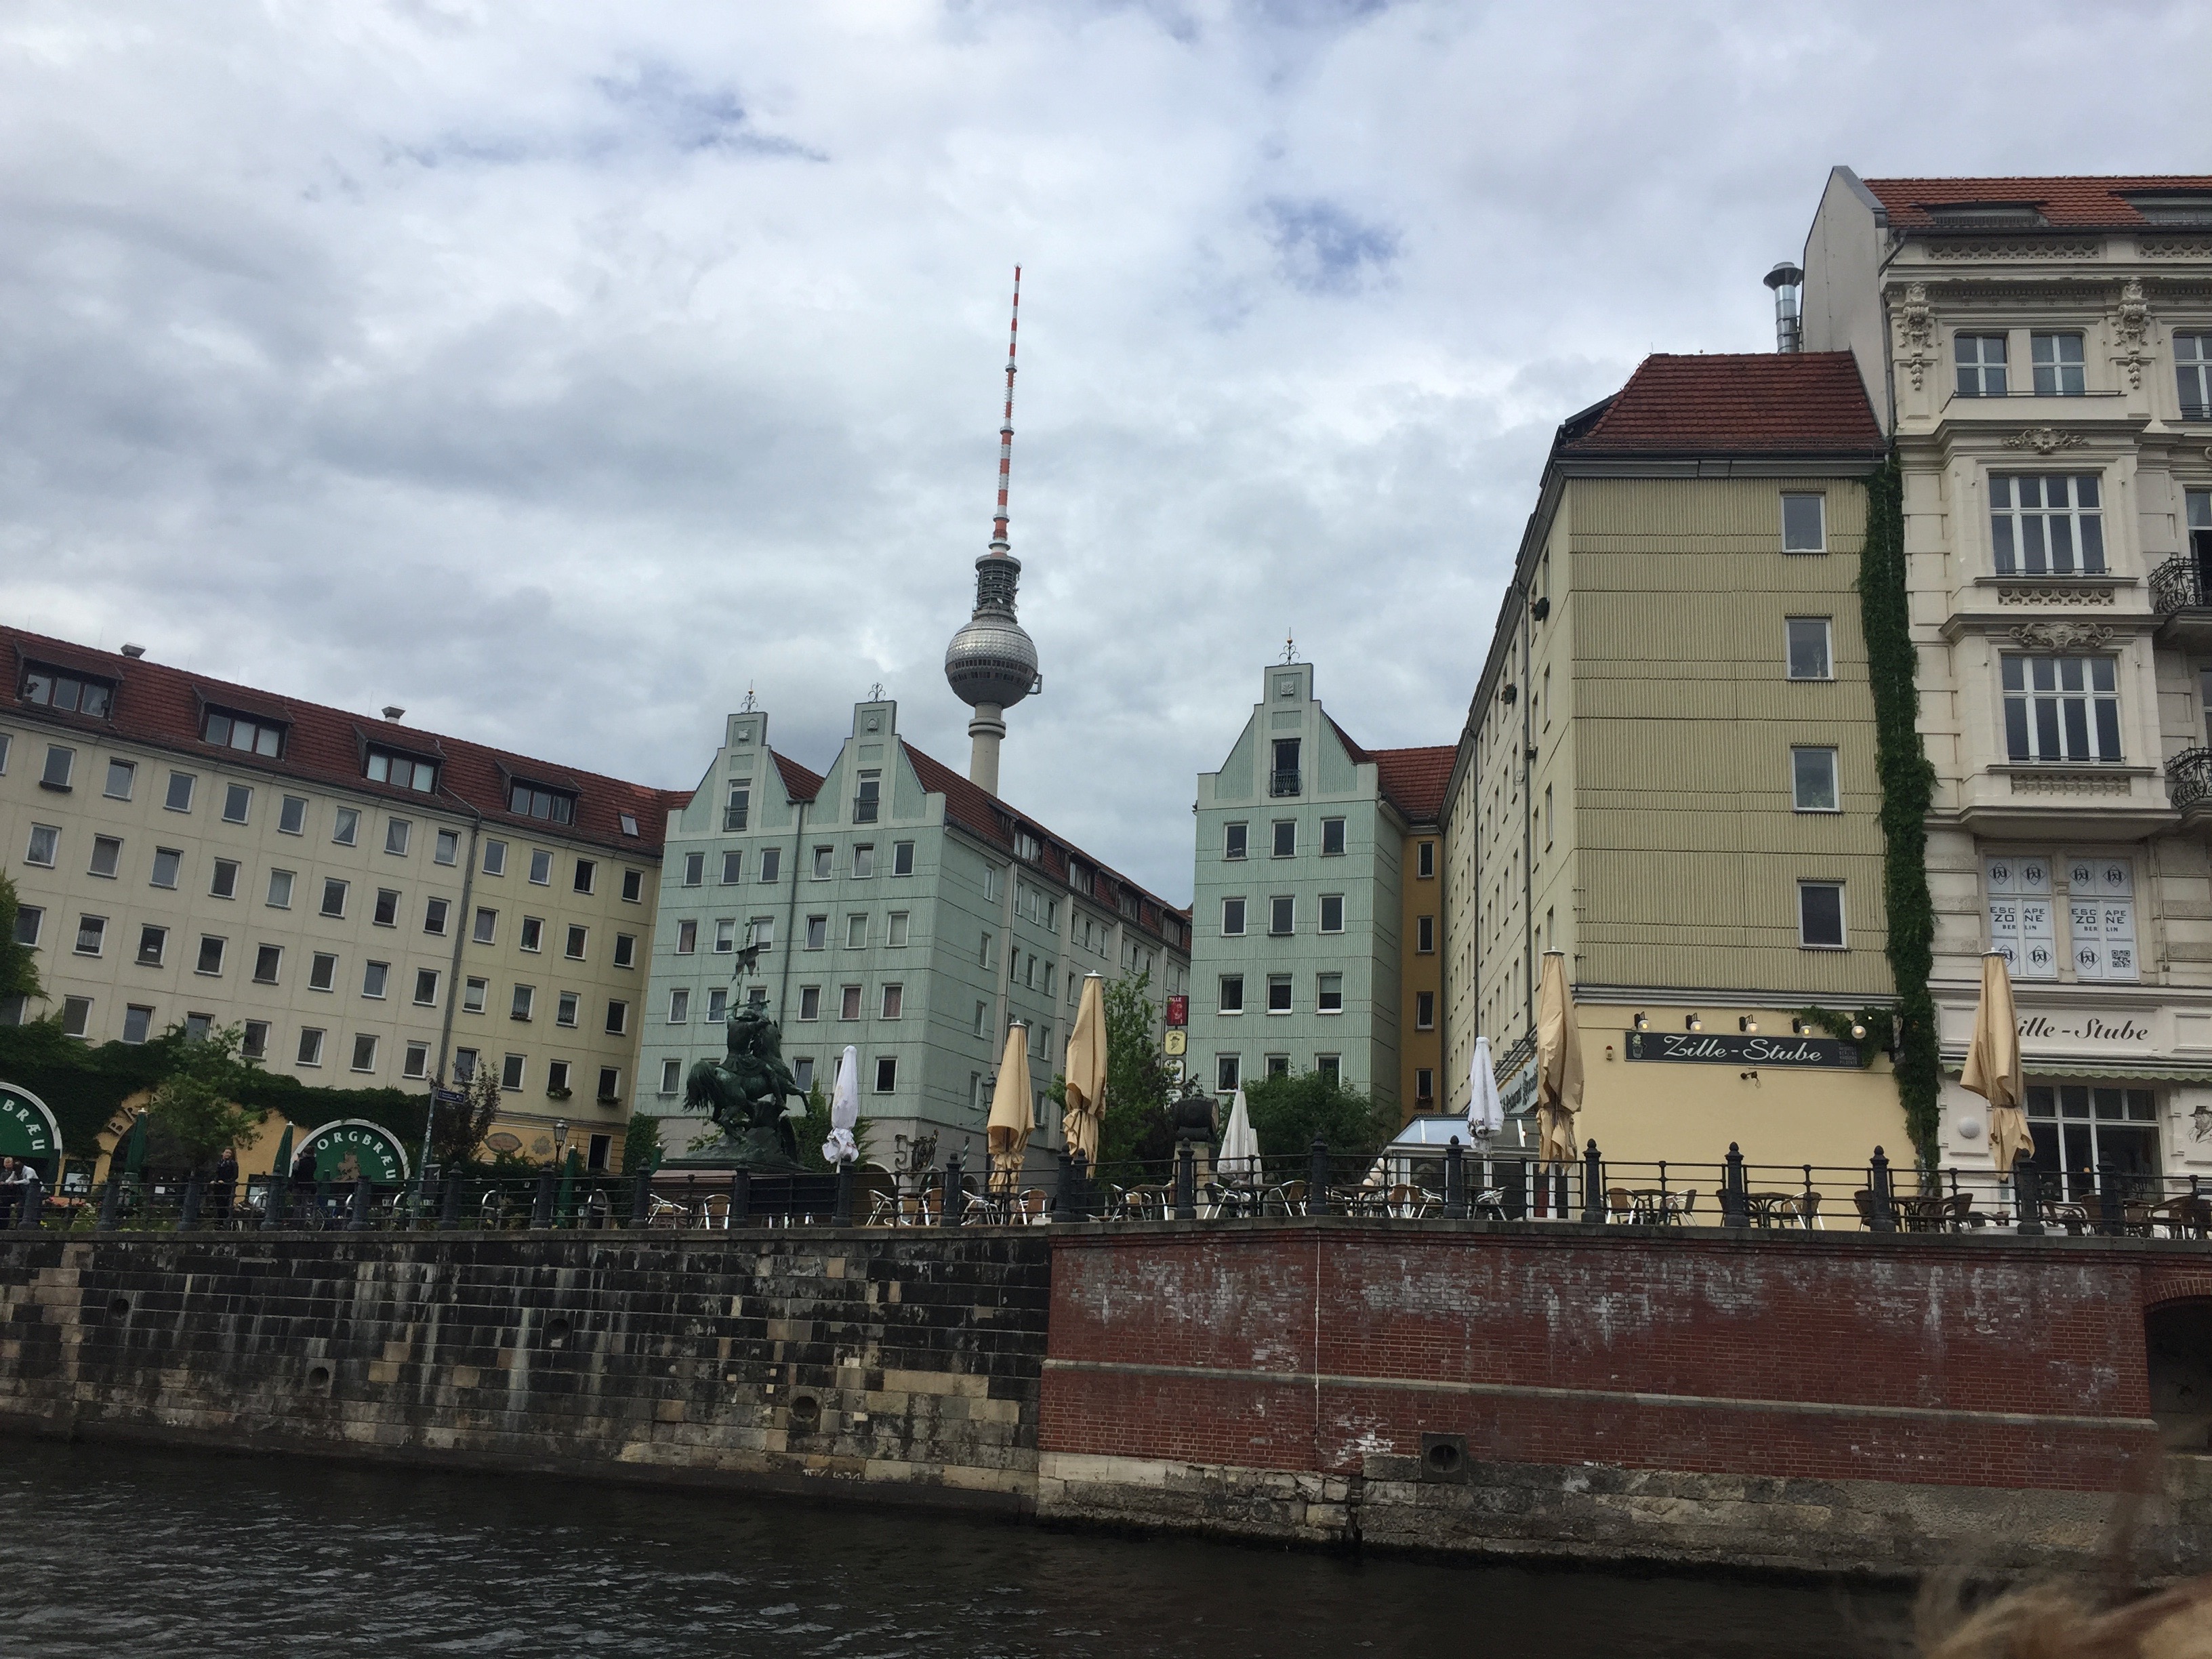 Why Ich bin ein Berliner has meaning for you and for WordWrite